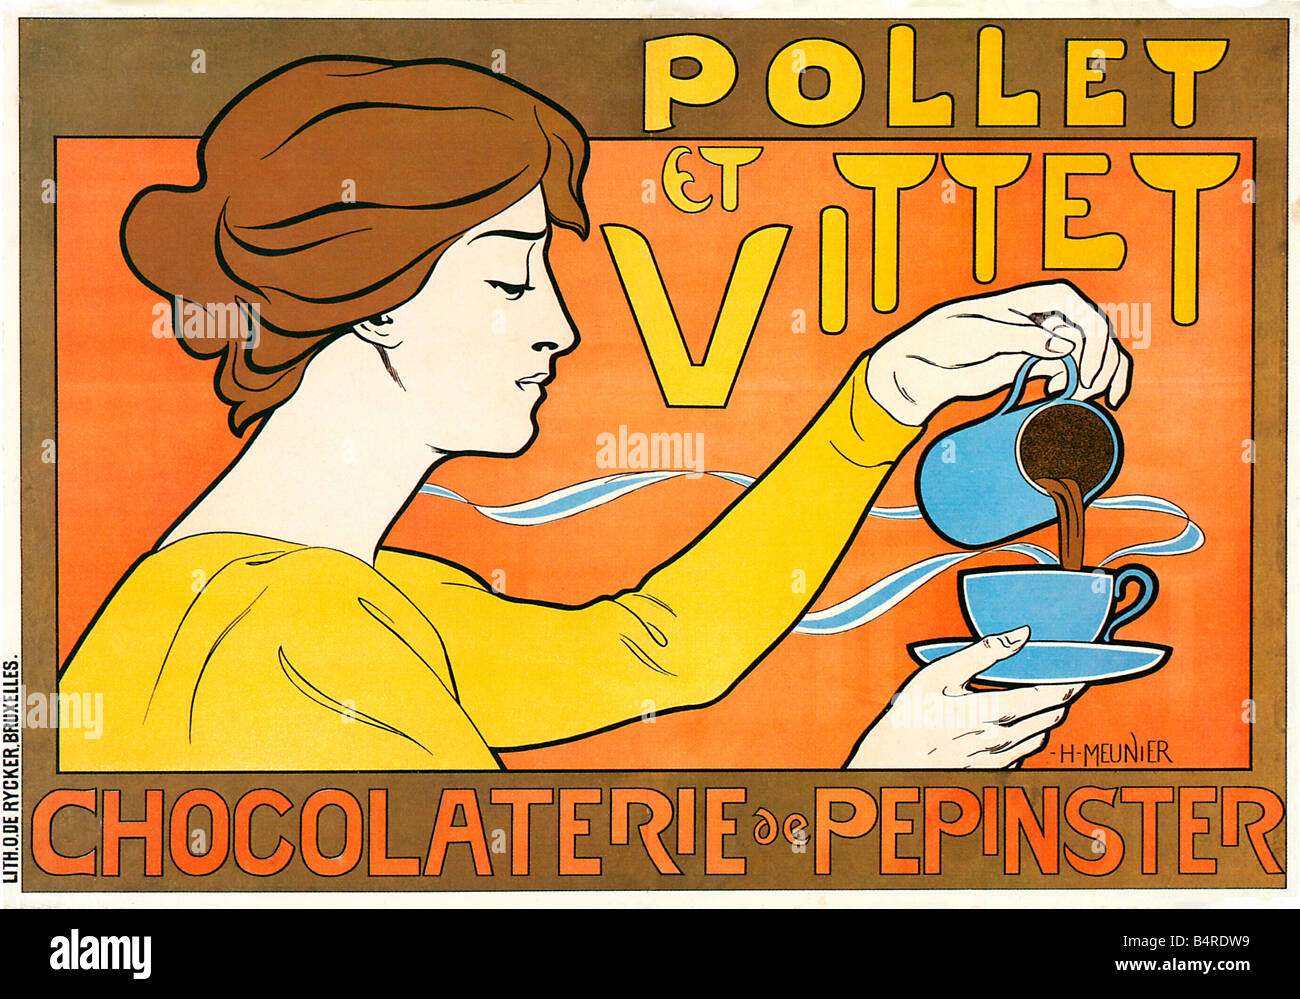 Pollet et Vittet Belgian Chocolate 1896 Art Nouveau poster for the hot chocolate drink from Pepinster in Belgium Stock Photo